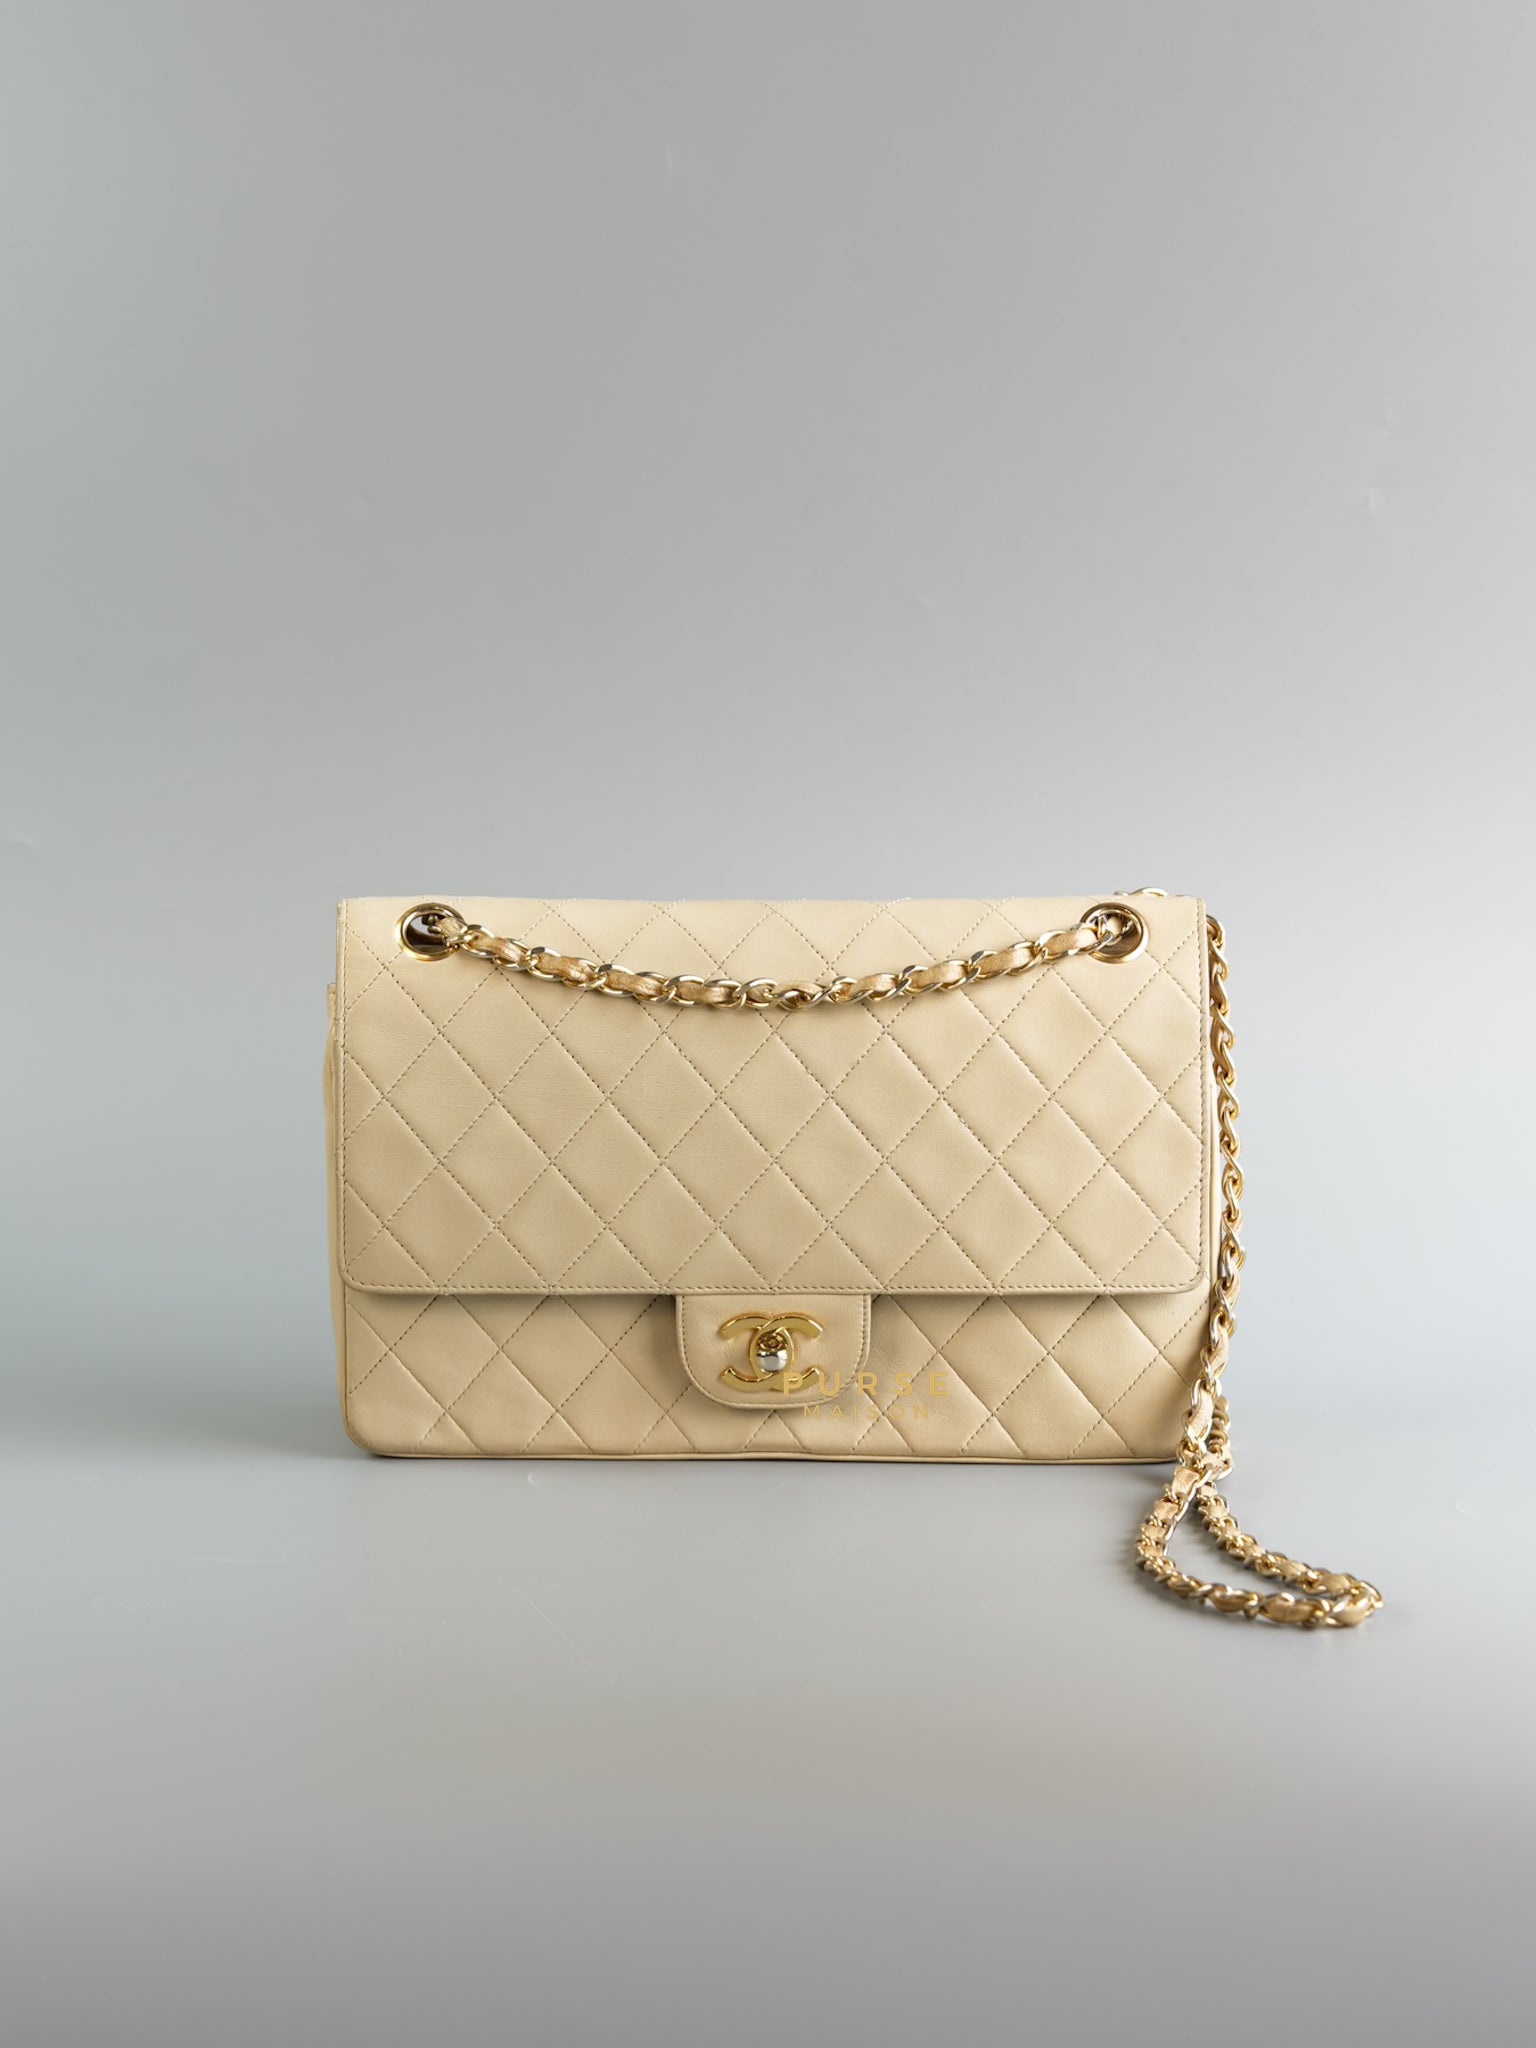 Vintage Classic Double Flap Medium in Beige Lambskin and 24k Gold Hardware Series 0 | Purse Maison Luxury Bags Shop